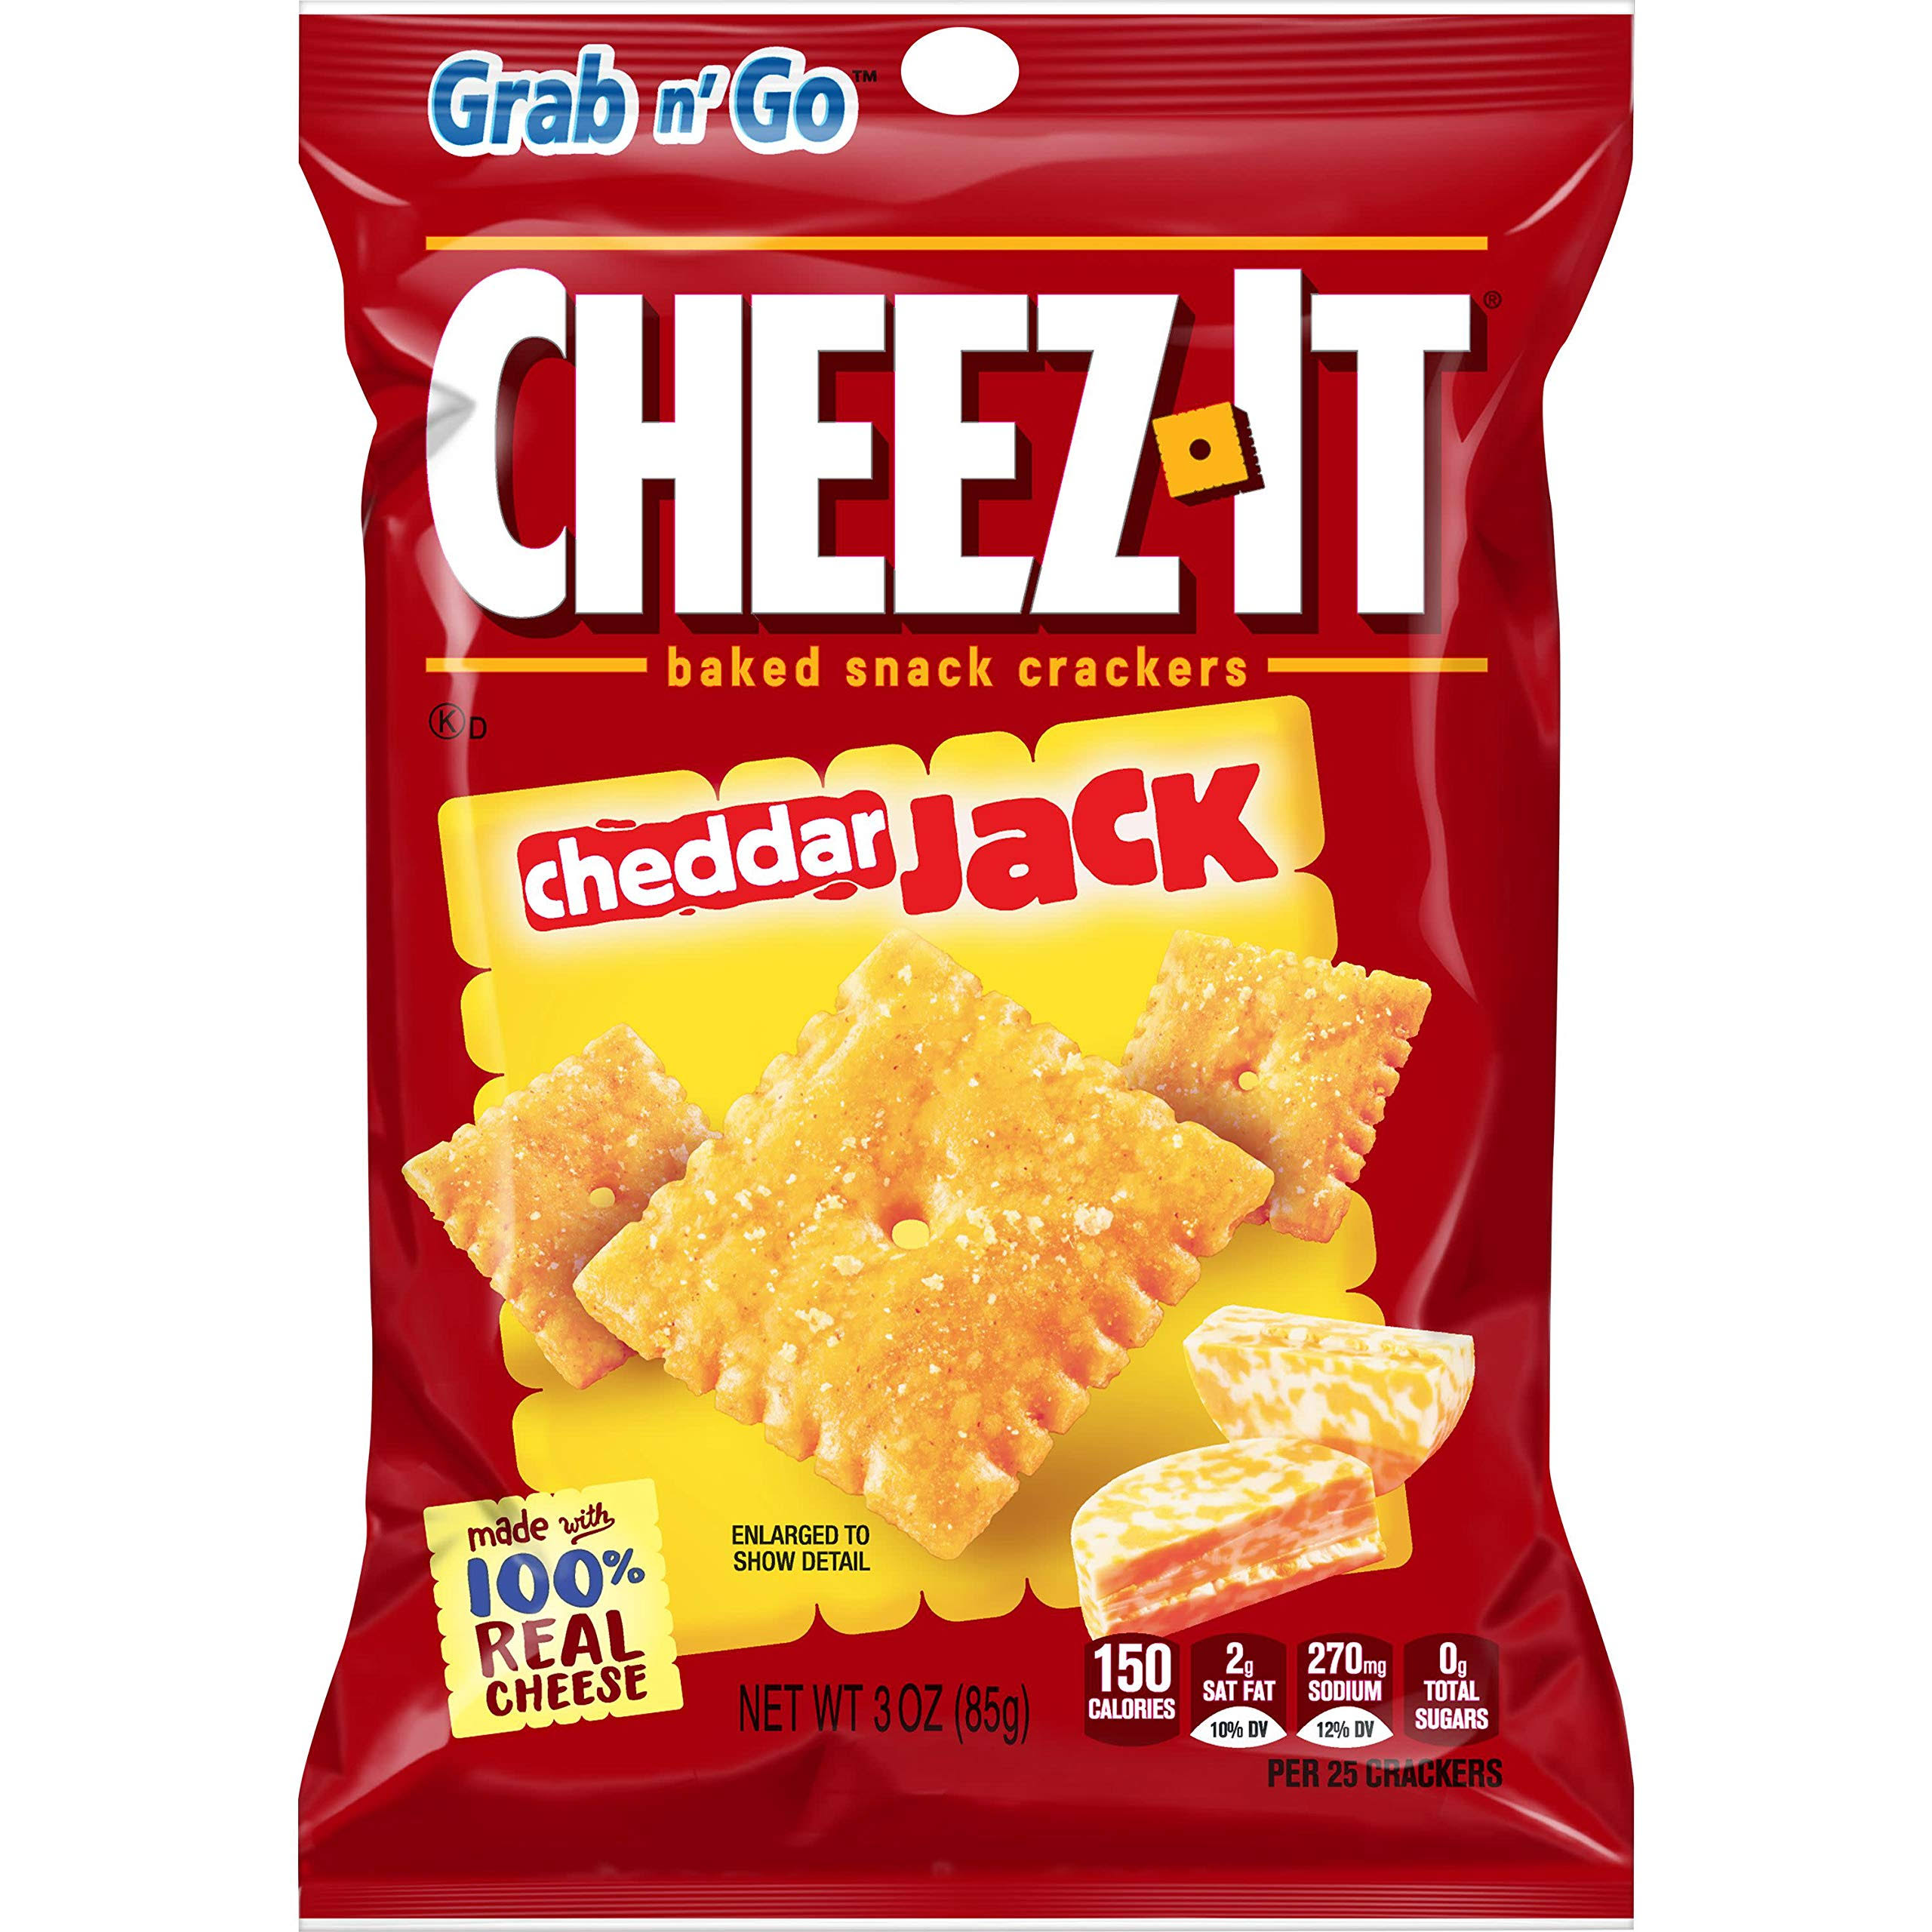 Cheez-It Baked Snack Crackers - Cheddar Jack, 3oz